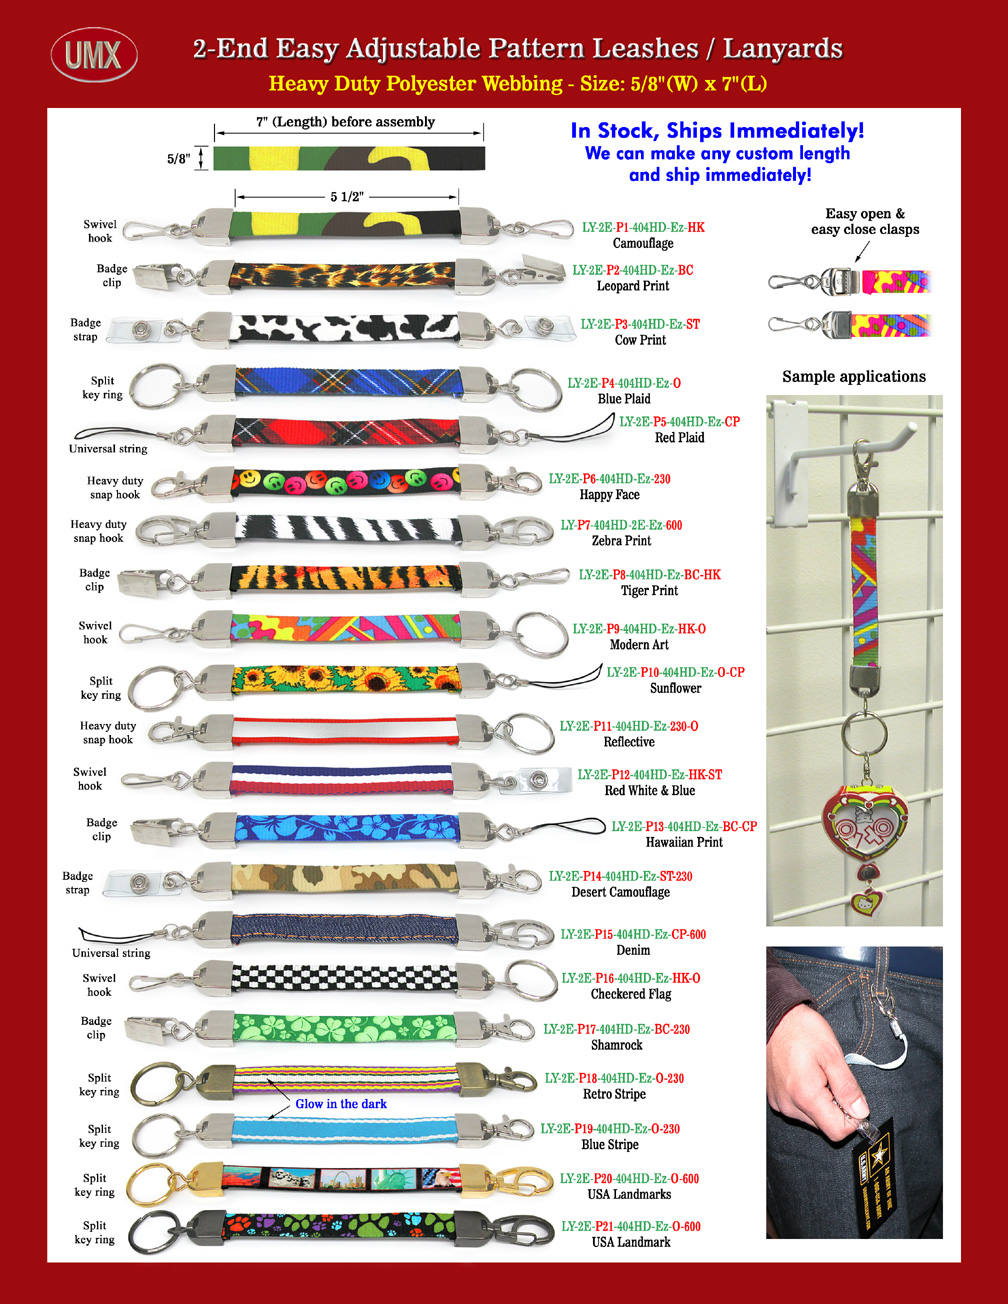 The great designed Ez-Adjustable 2-end pre-printed lanyards come with 5/8" heavy duty pre-printed pattern polyester straps.